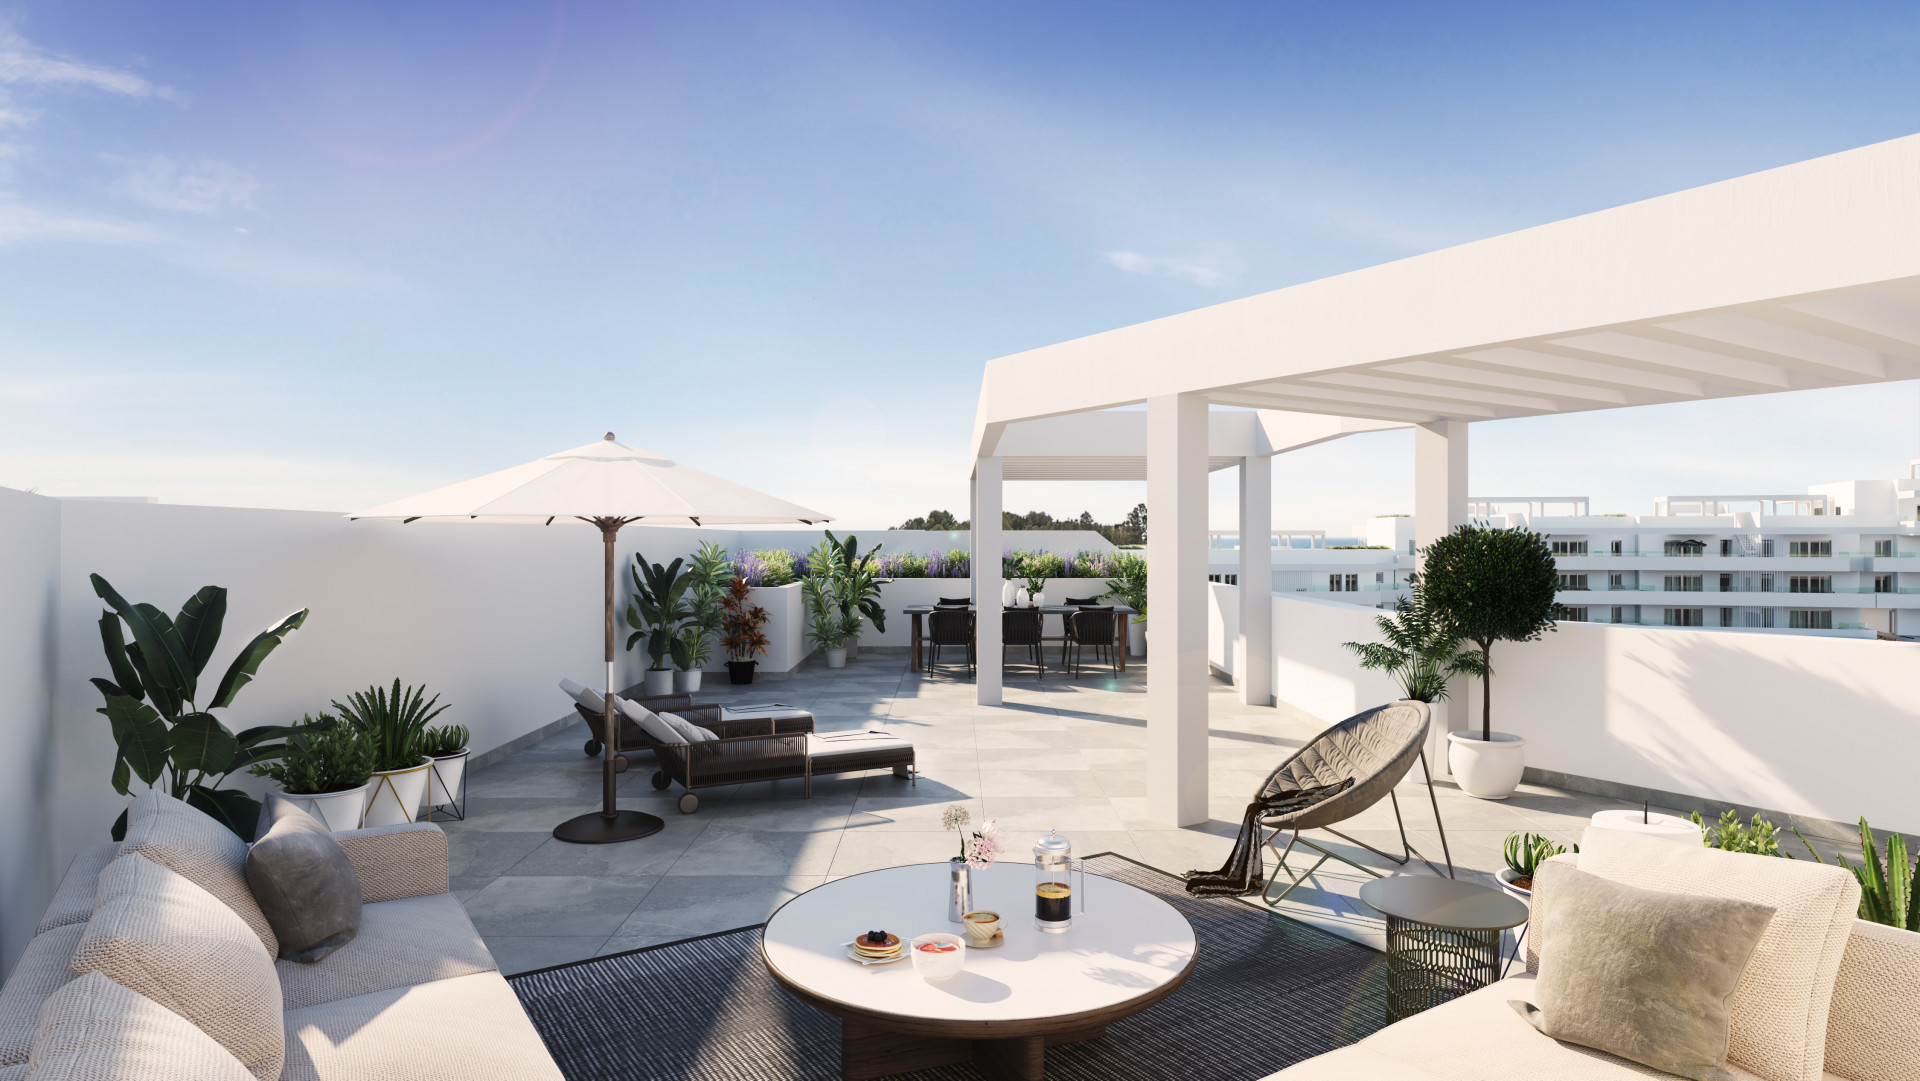 EXCELLENT BRAND NEW 2-BEDROOM DUPLEX PENTHOUSE IN SPACIOUS COMPLEX IN MALAGA...